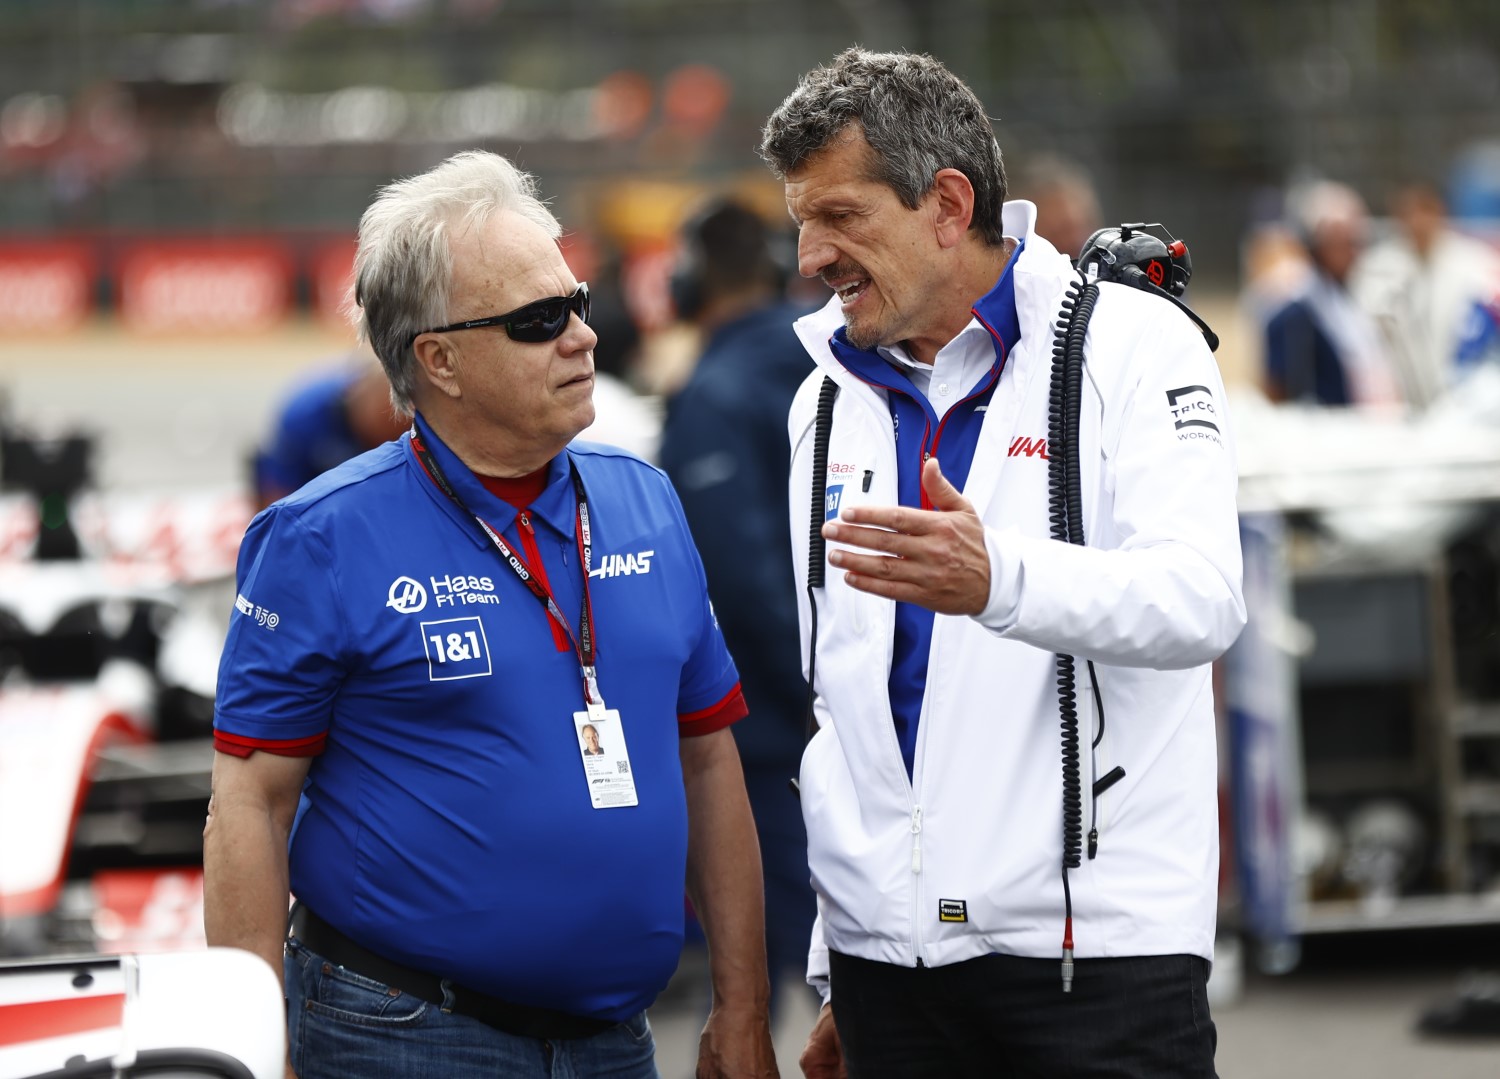 Gene Haas, Owner and Founder, Haas F1, and Guenther Steiner, Team Principal, Haas F1 during the British GP at Silverstone Circuit on Sunday July 03, 2022 in Northamptonshire, United Kingdom. (Photo by Andy Hone / LAT Images)